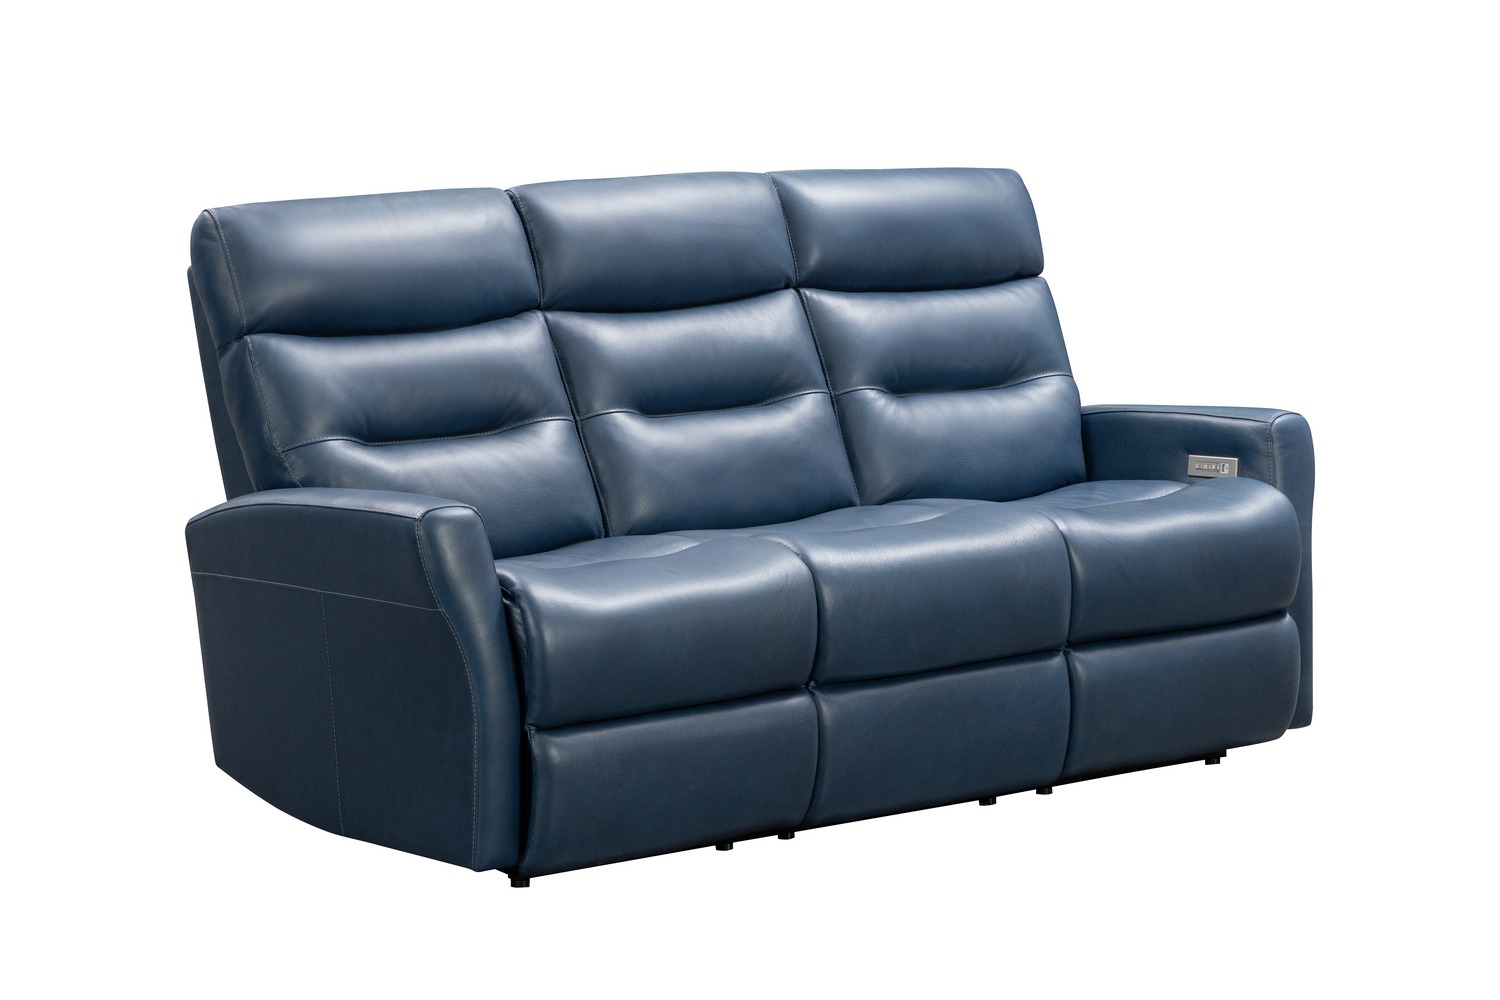 Barcalounger Enzo Power Reclining Sofa with Power Head Rests and Power Lumbar - Marco Navy Blue/Leather Match